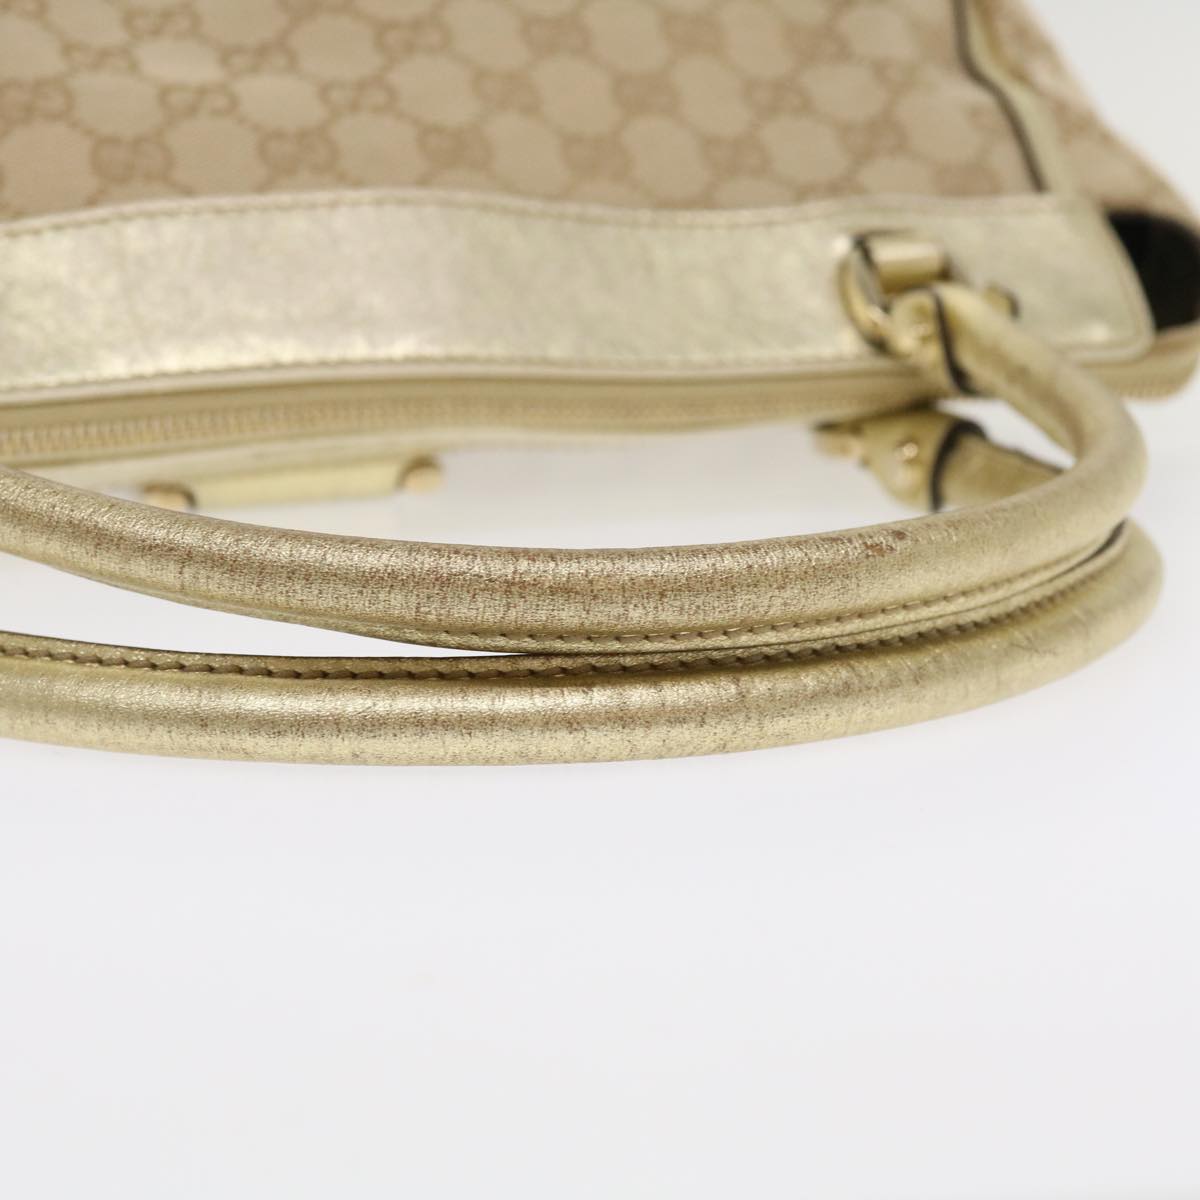 GUCCI GG Canvas Abbey Tote Bag Beige Champagne Gold 189831 Auth yk5652